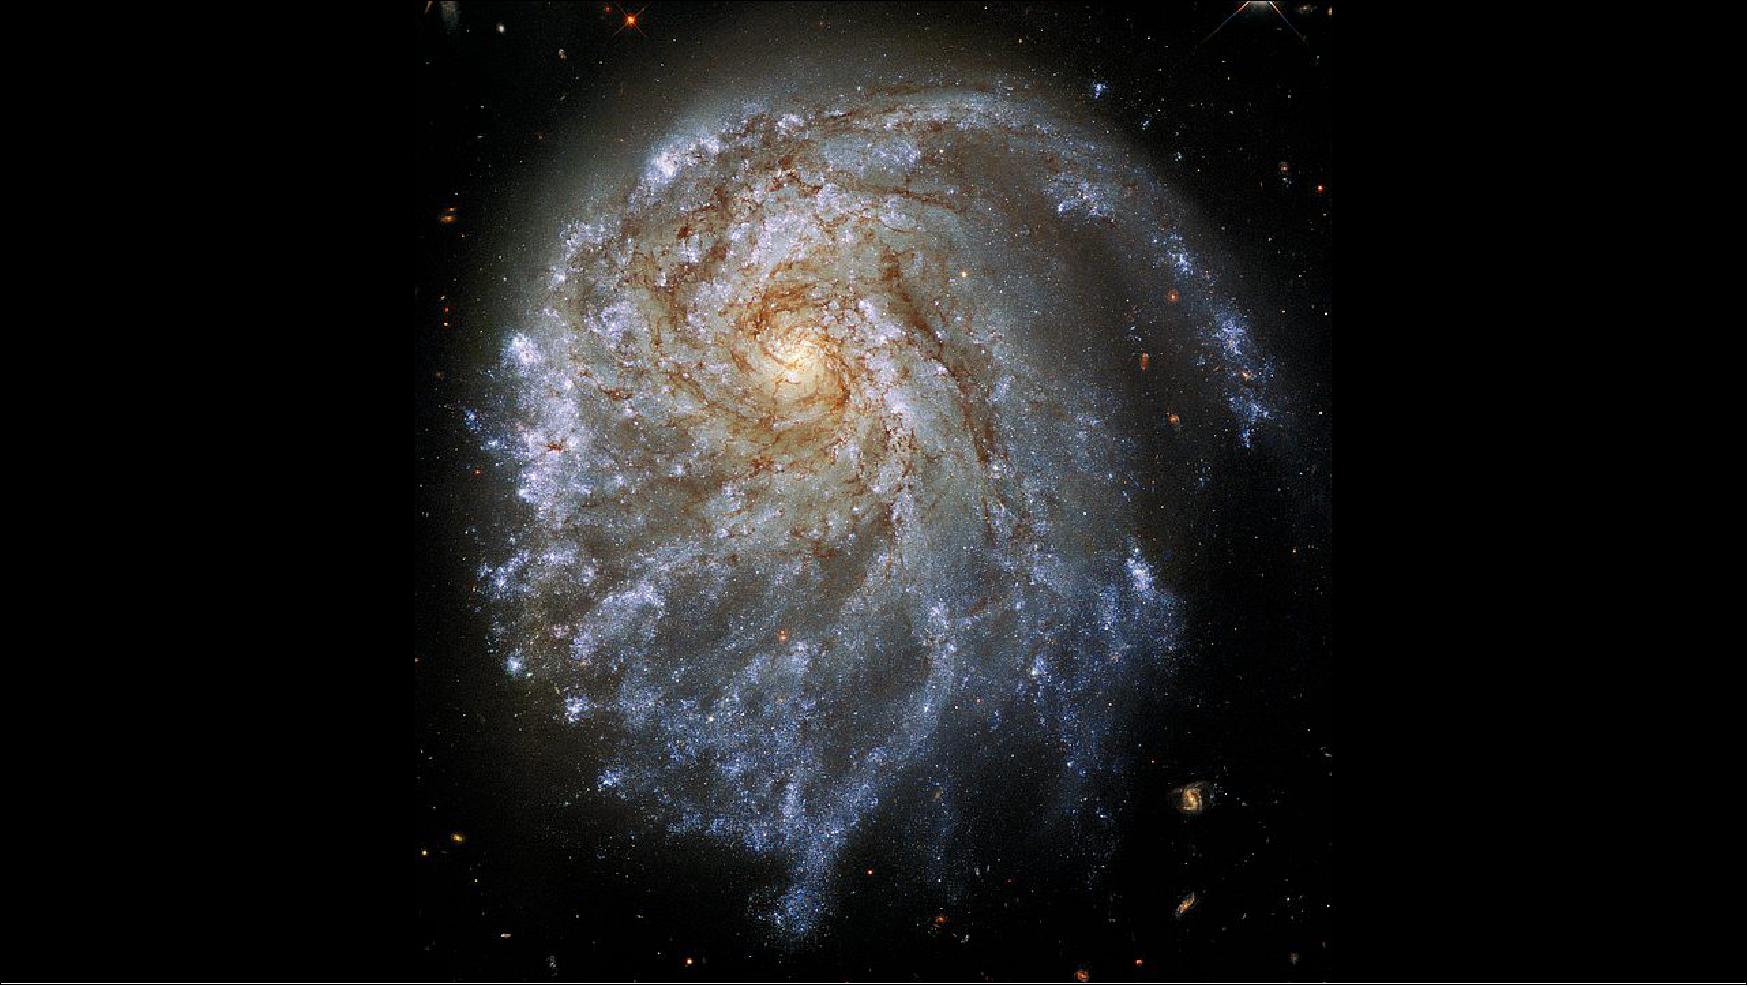 Figure 84: The magnificent spiral galaxy NGC 2276 looks a bit lopsided in this Hubble Space Telescope snapshot. A bright hub of older yellowish stars normally lies directly in the center of most spiral galaxies. But the bulge in NGC 2276 looks offset to the upper left. This image was taken as part of the Hubble observation program #15615 (PI: P. Sell), a collaboration between the University of Florida (USA), the University of Crete/FORTH (Greece), INAF-Brera (Italy), and the Center for Astrophysics | Harvard & Smithsonian (USA) [image credit: NASA, ESA, STScI, Paul Sell (University of Florida), acknowledgement: Leo Shatz]